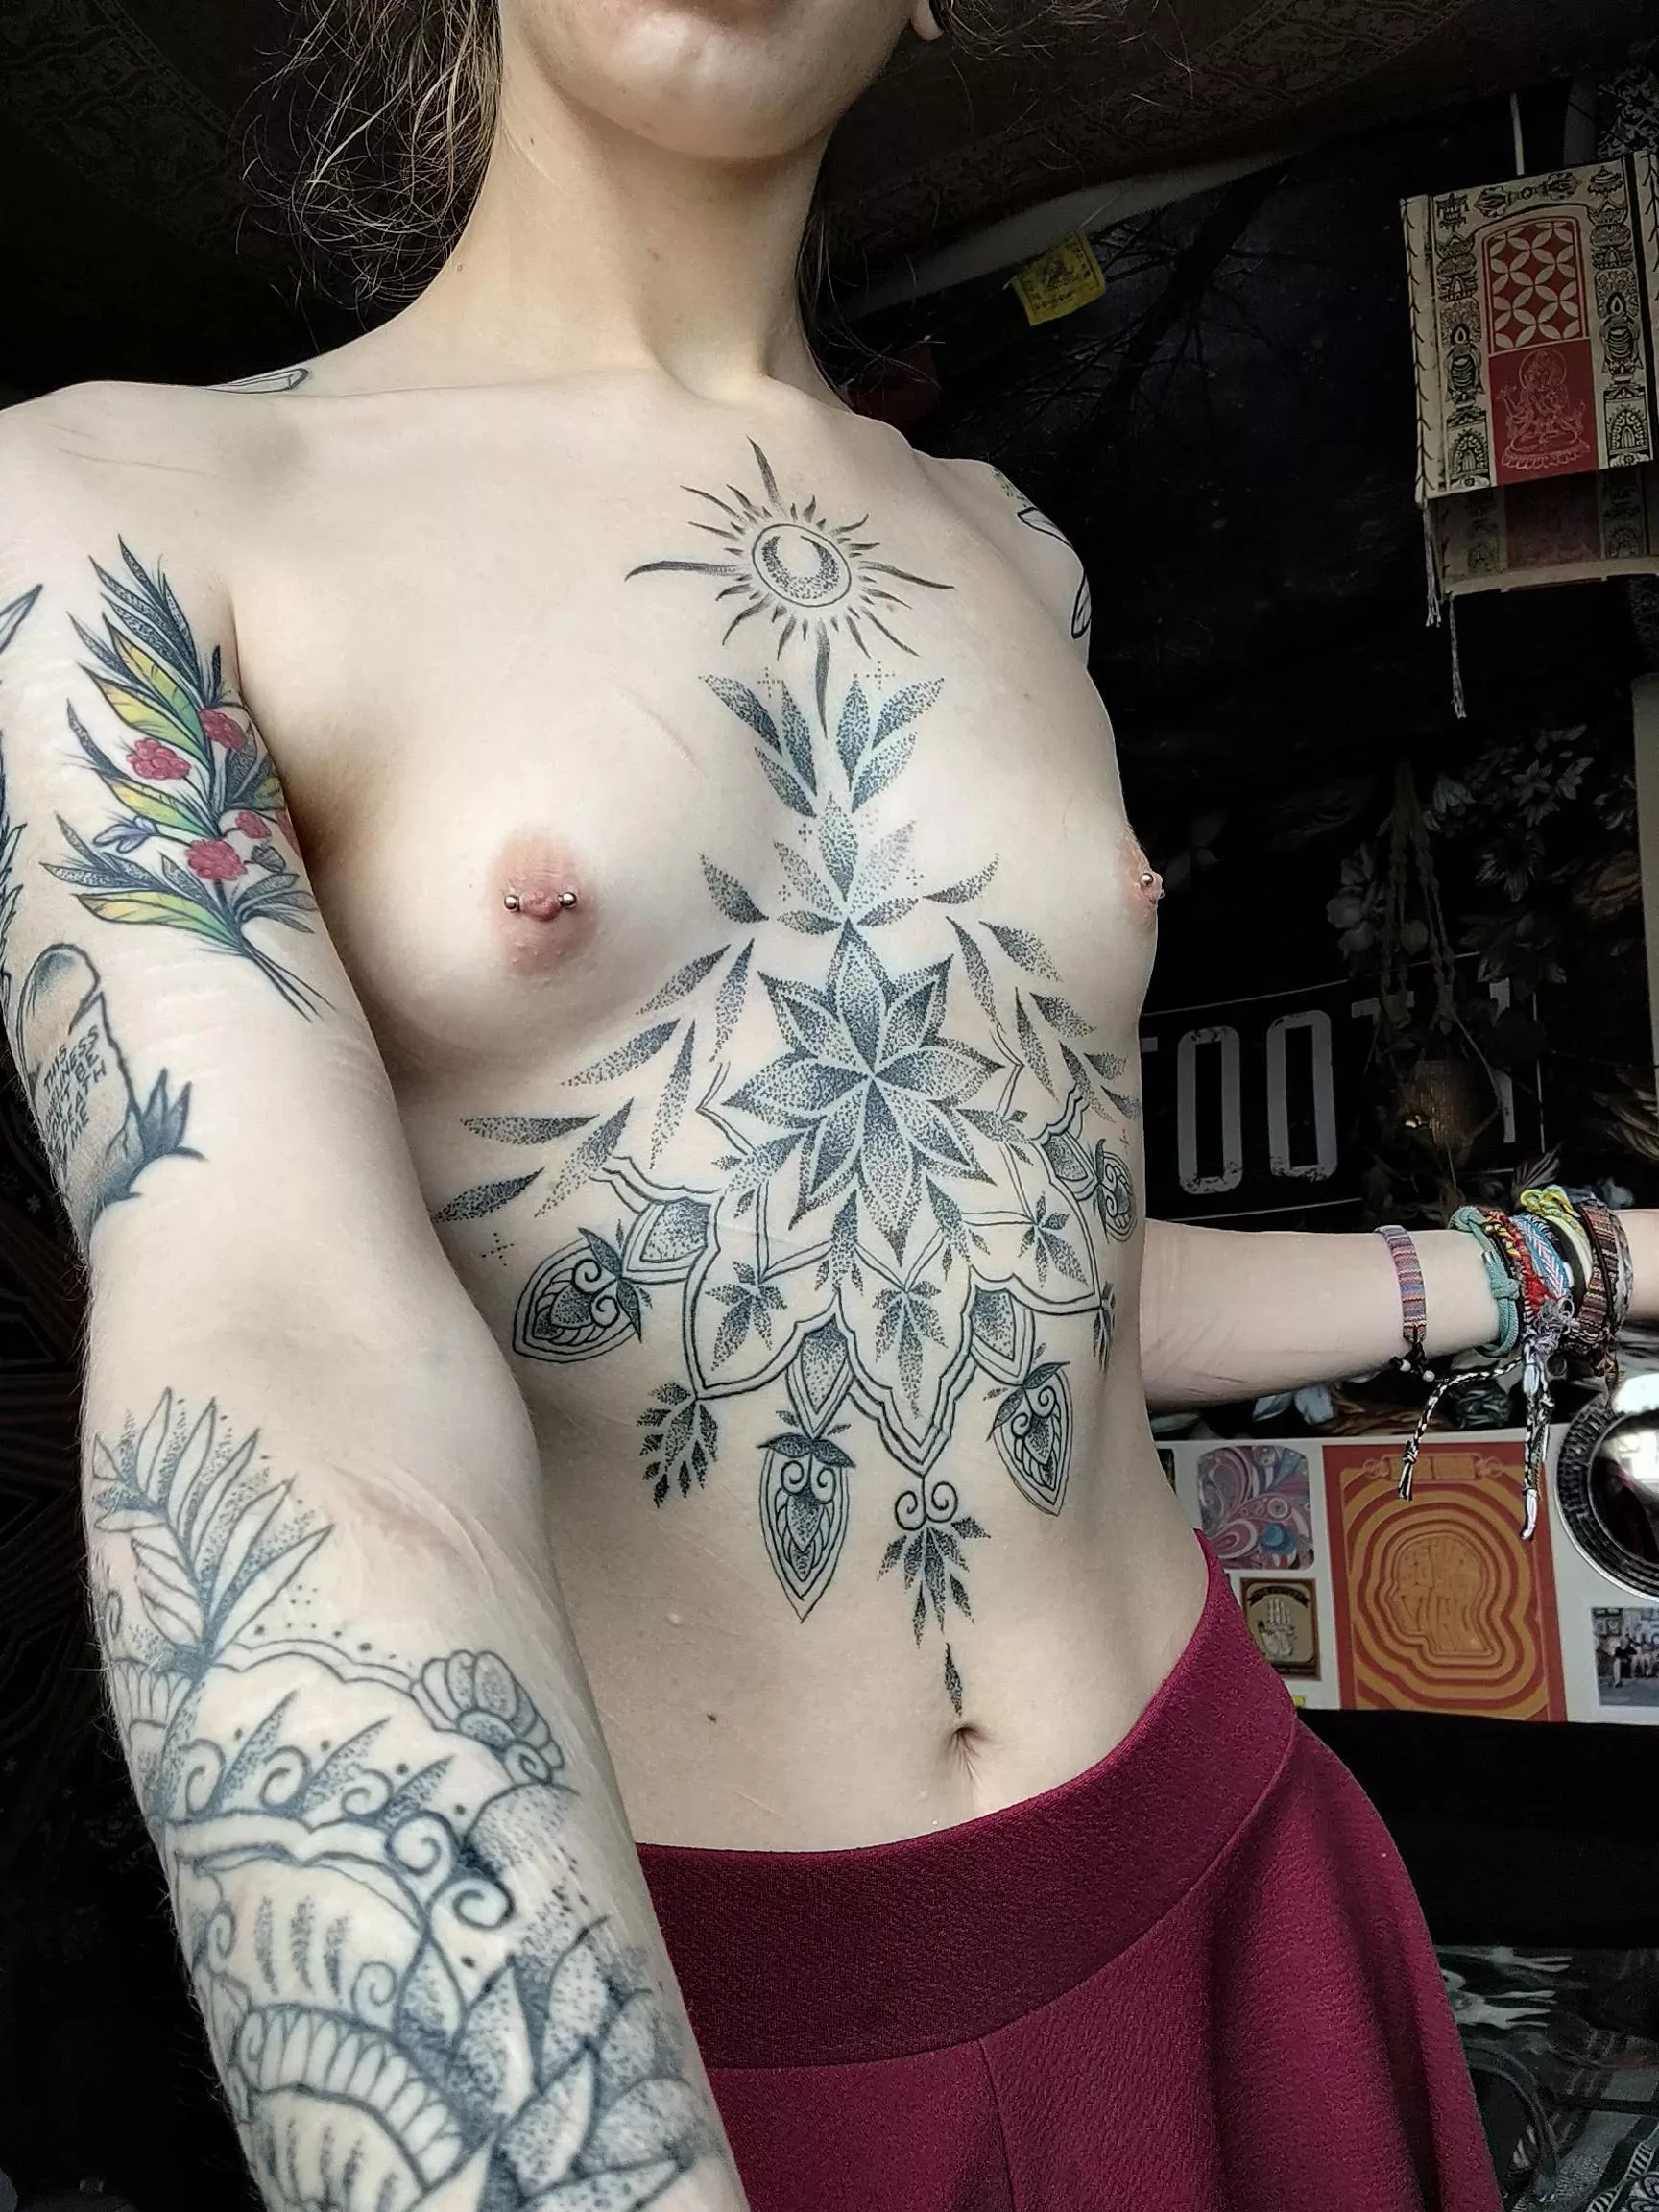 My newest tattoo frames my small tits so nicely nudes by liltiddyhippie